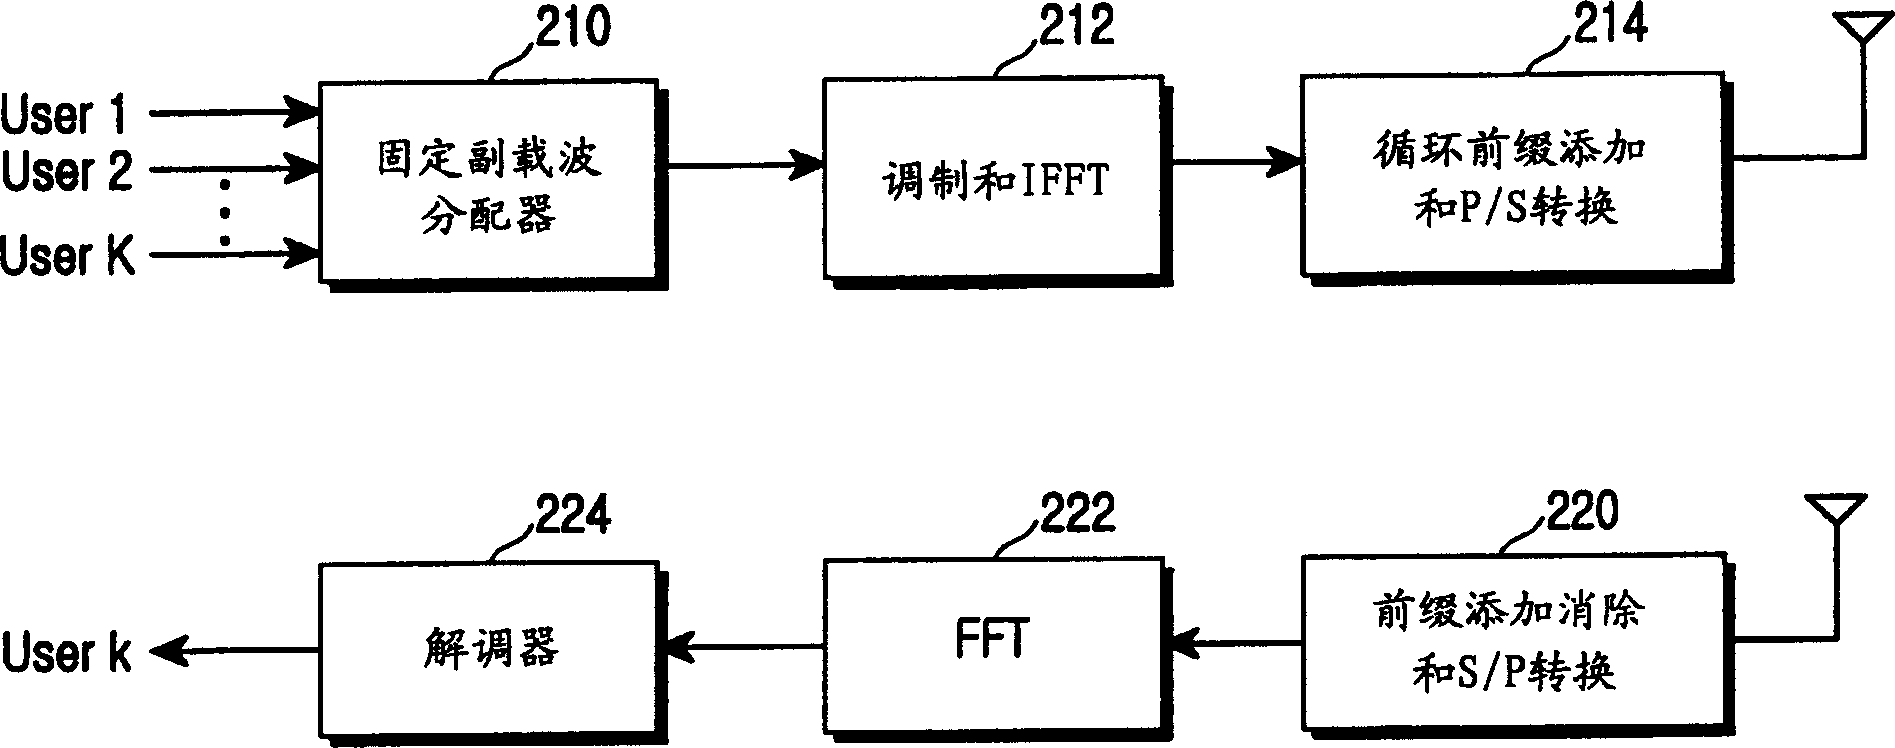 Apparatus and method for allocating resources of a virtual cell in an OFDM mobile communication system